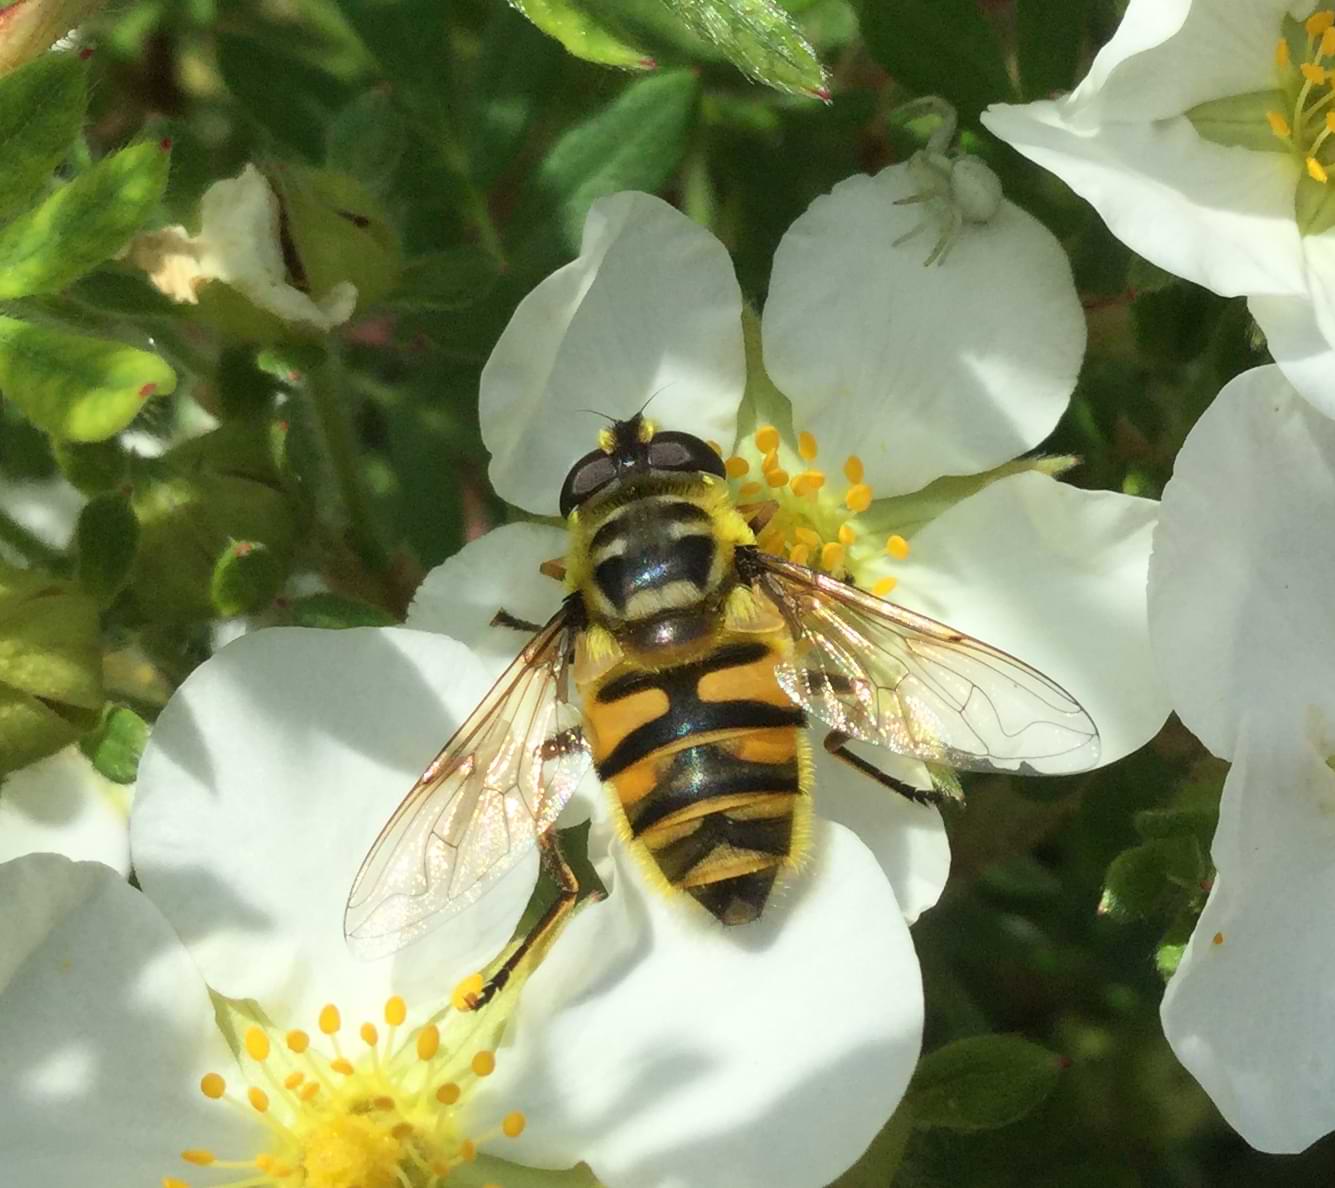 A large golden yellow hoverfly resting on a white flower. A white crab spider hides on the edge of a petal and looks tiny by comparison.